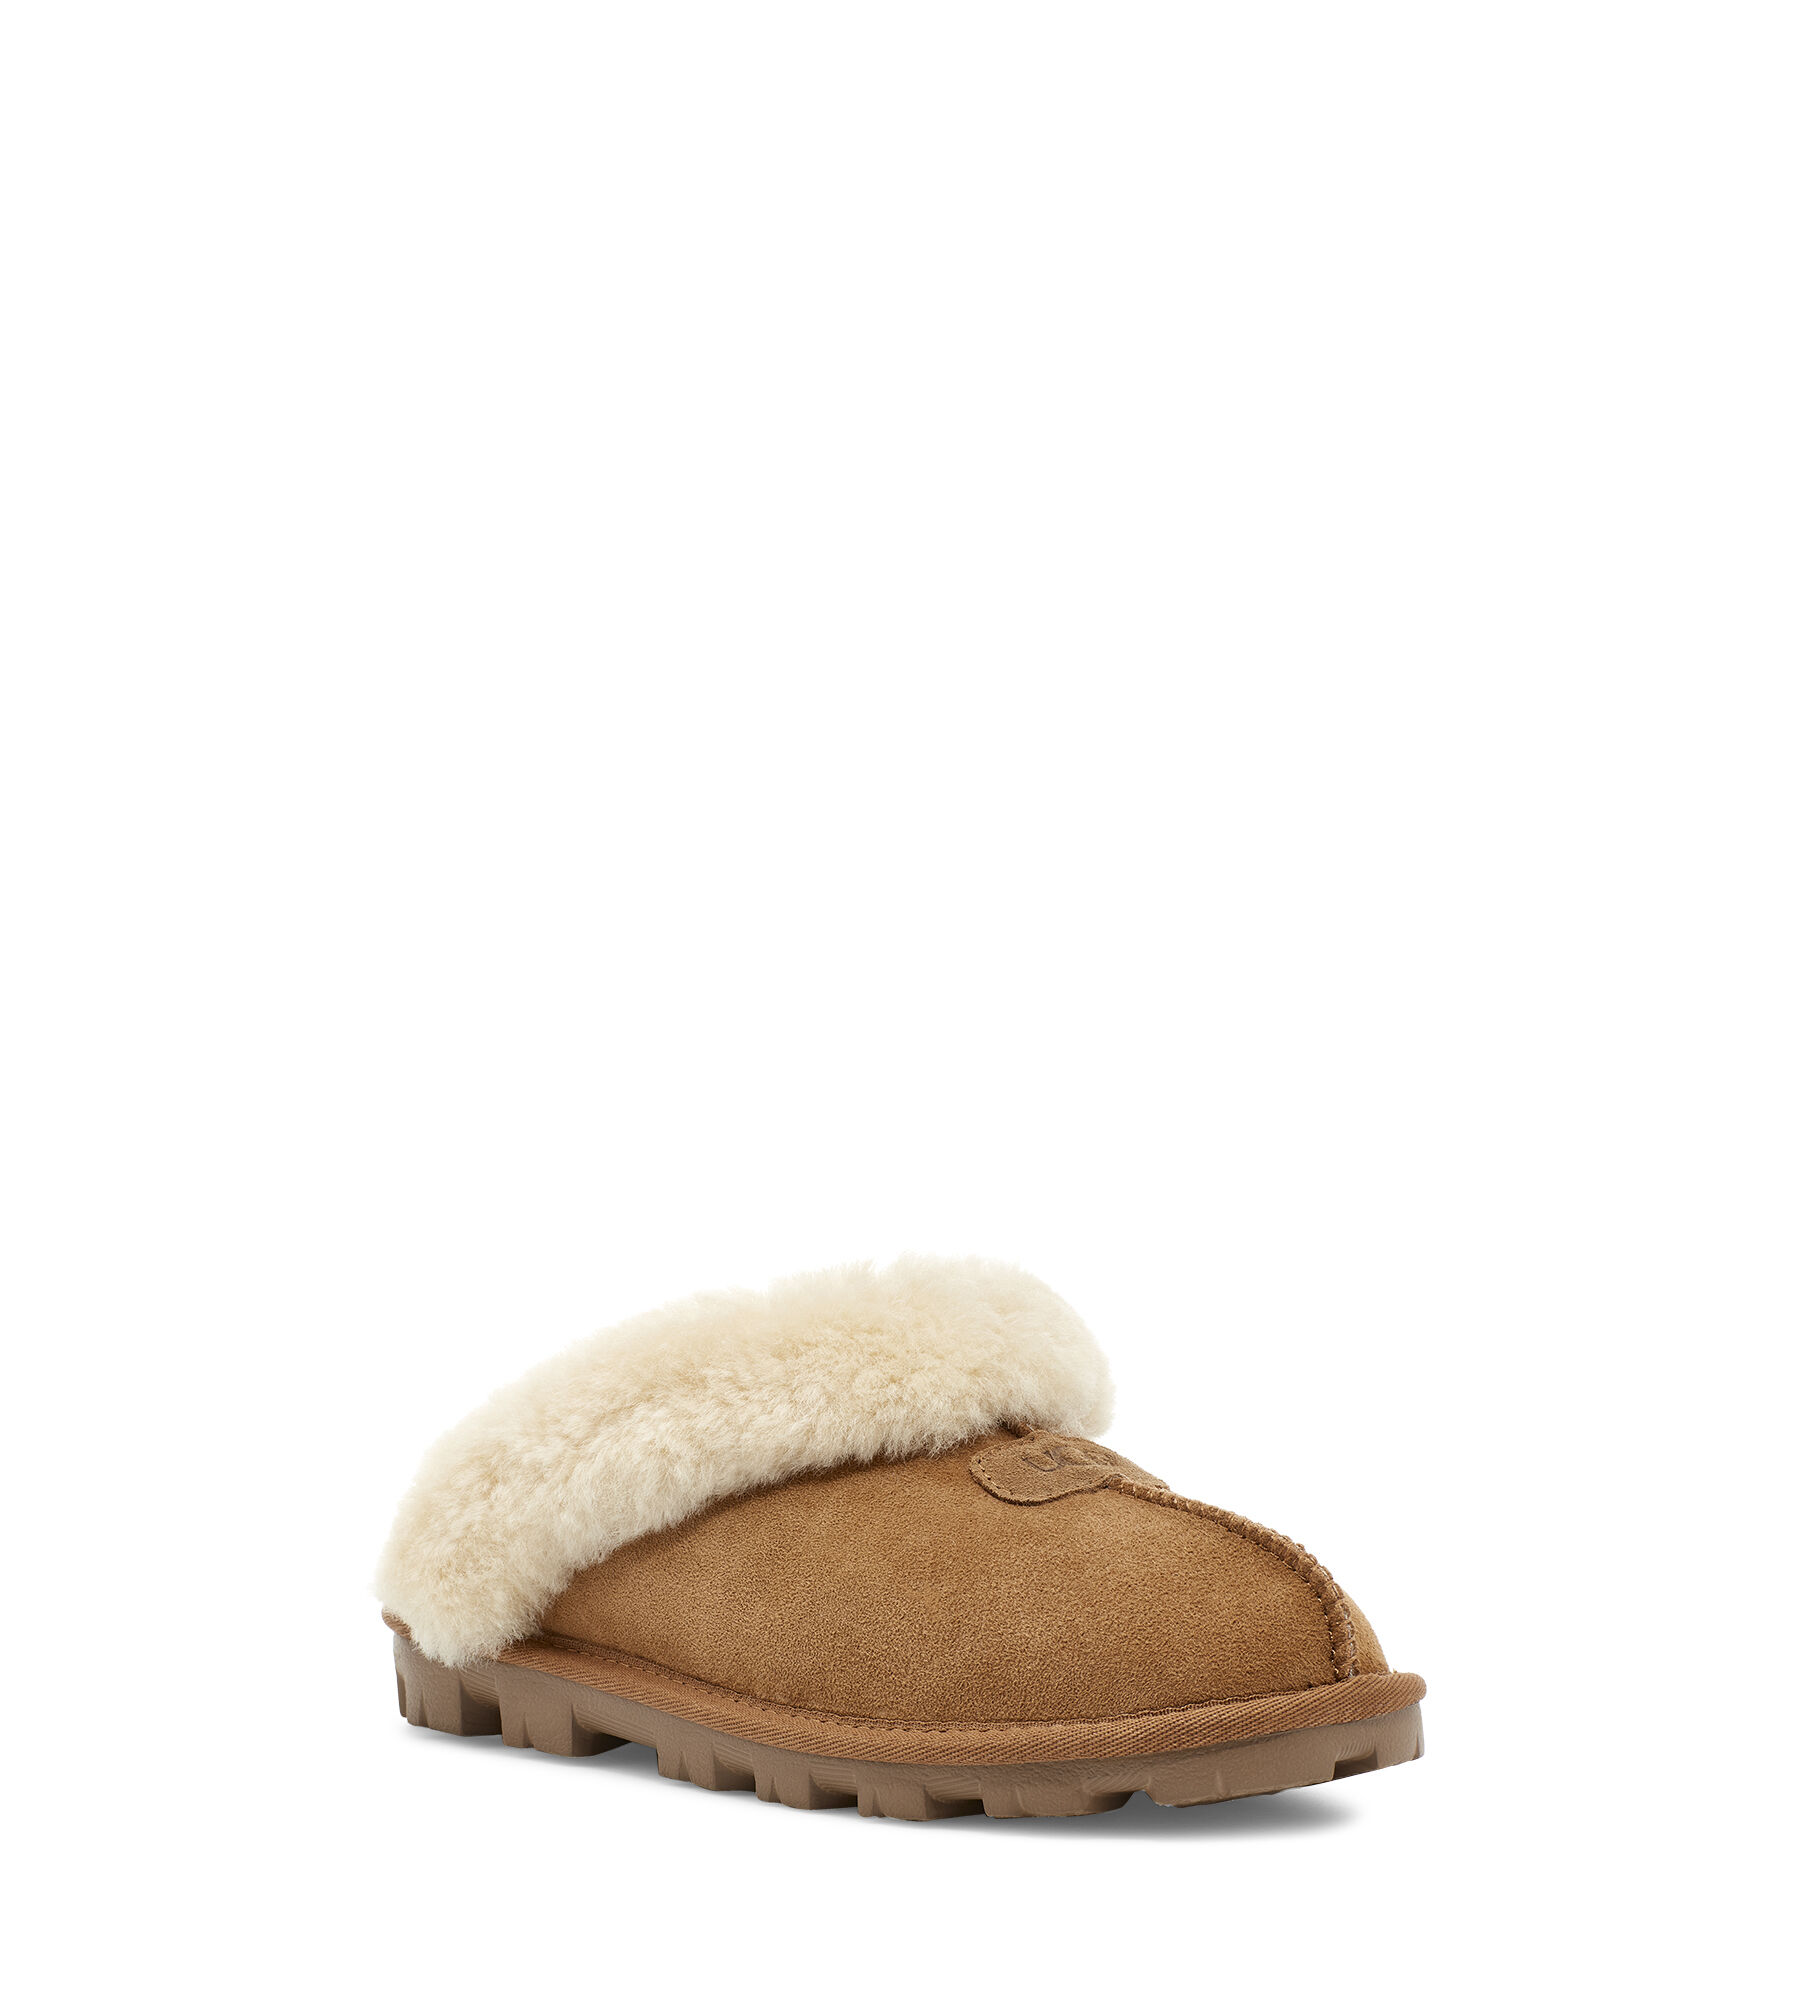 size 13 ugg slippers